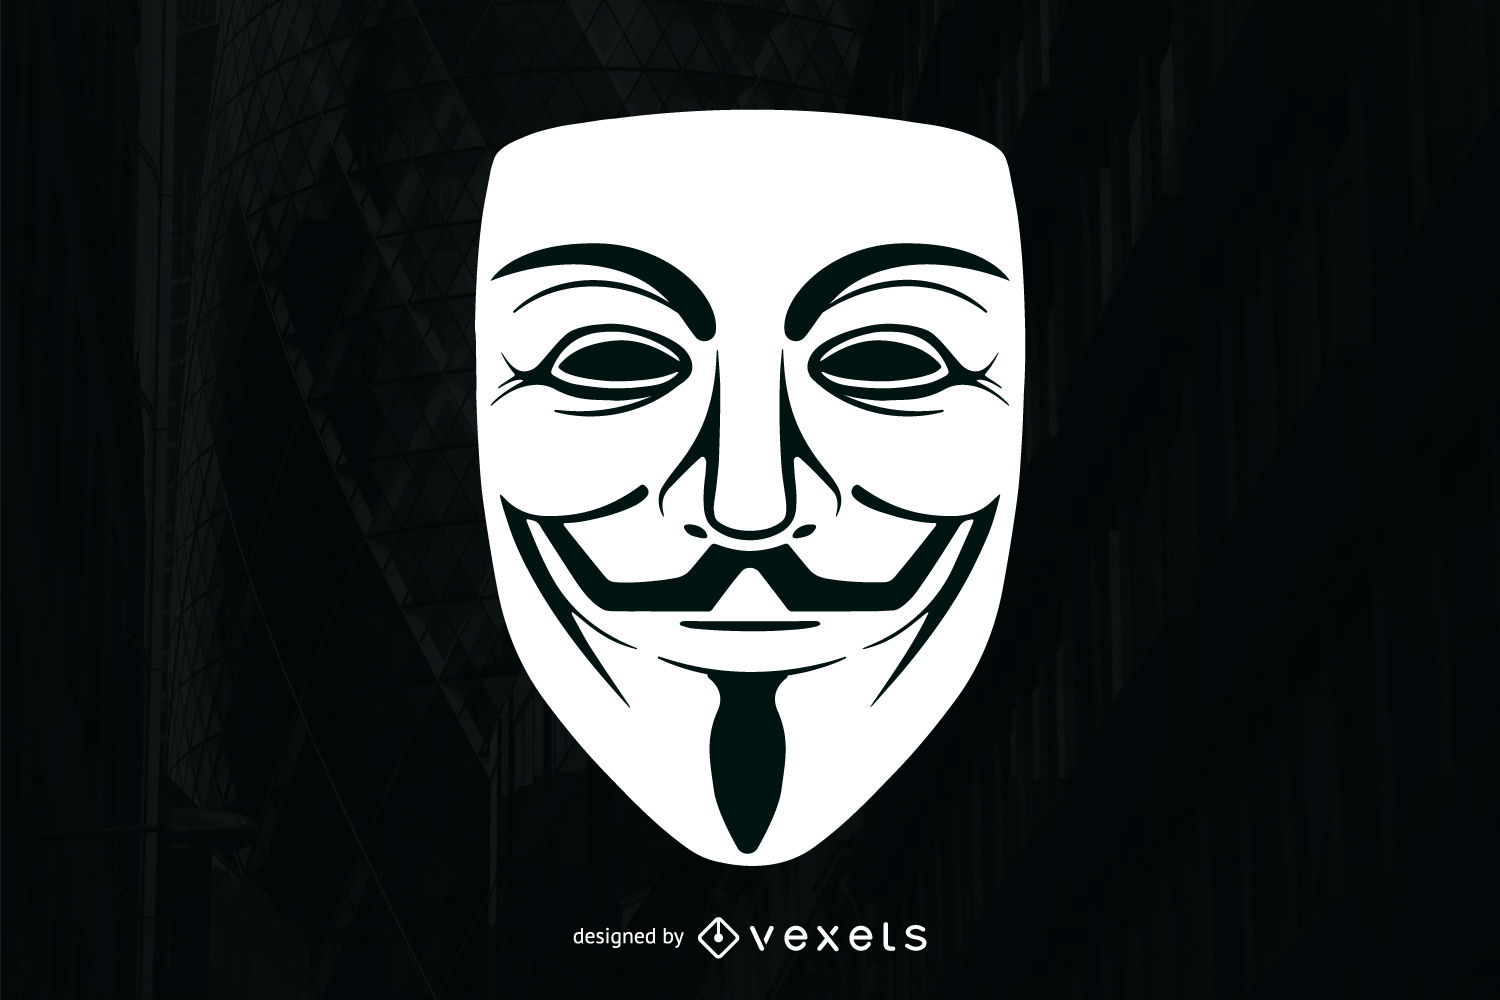 Guy Fawkes Mask Vector At Getdrawings Free Download